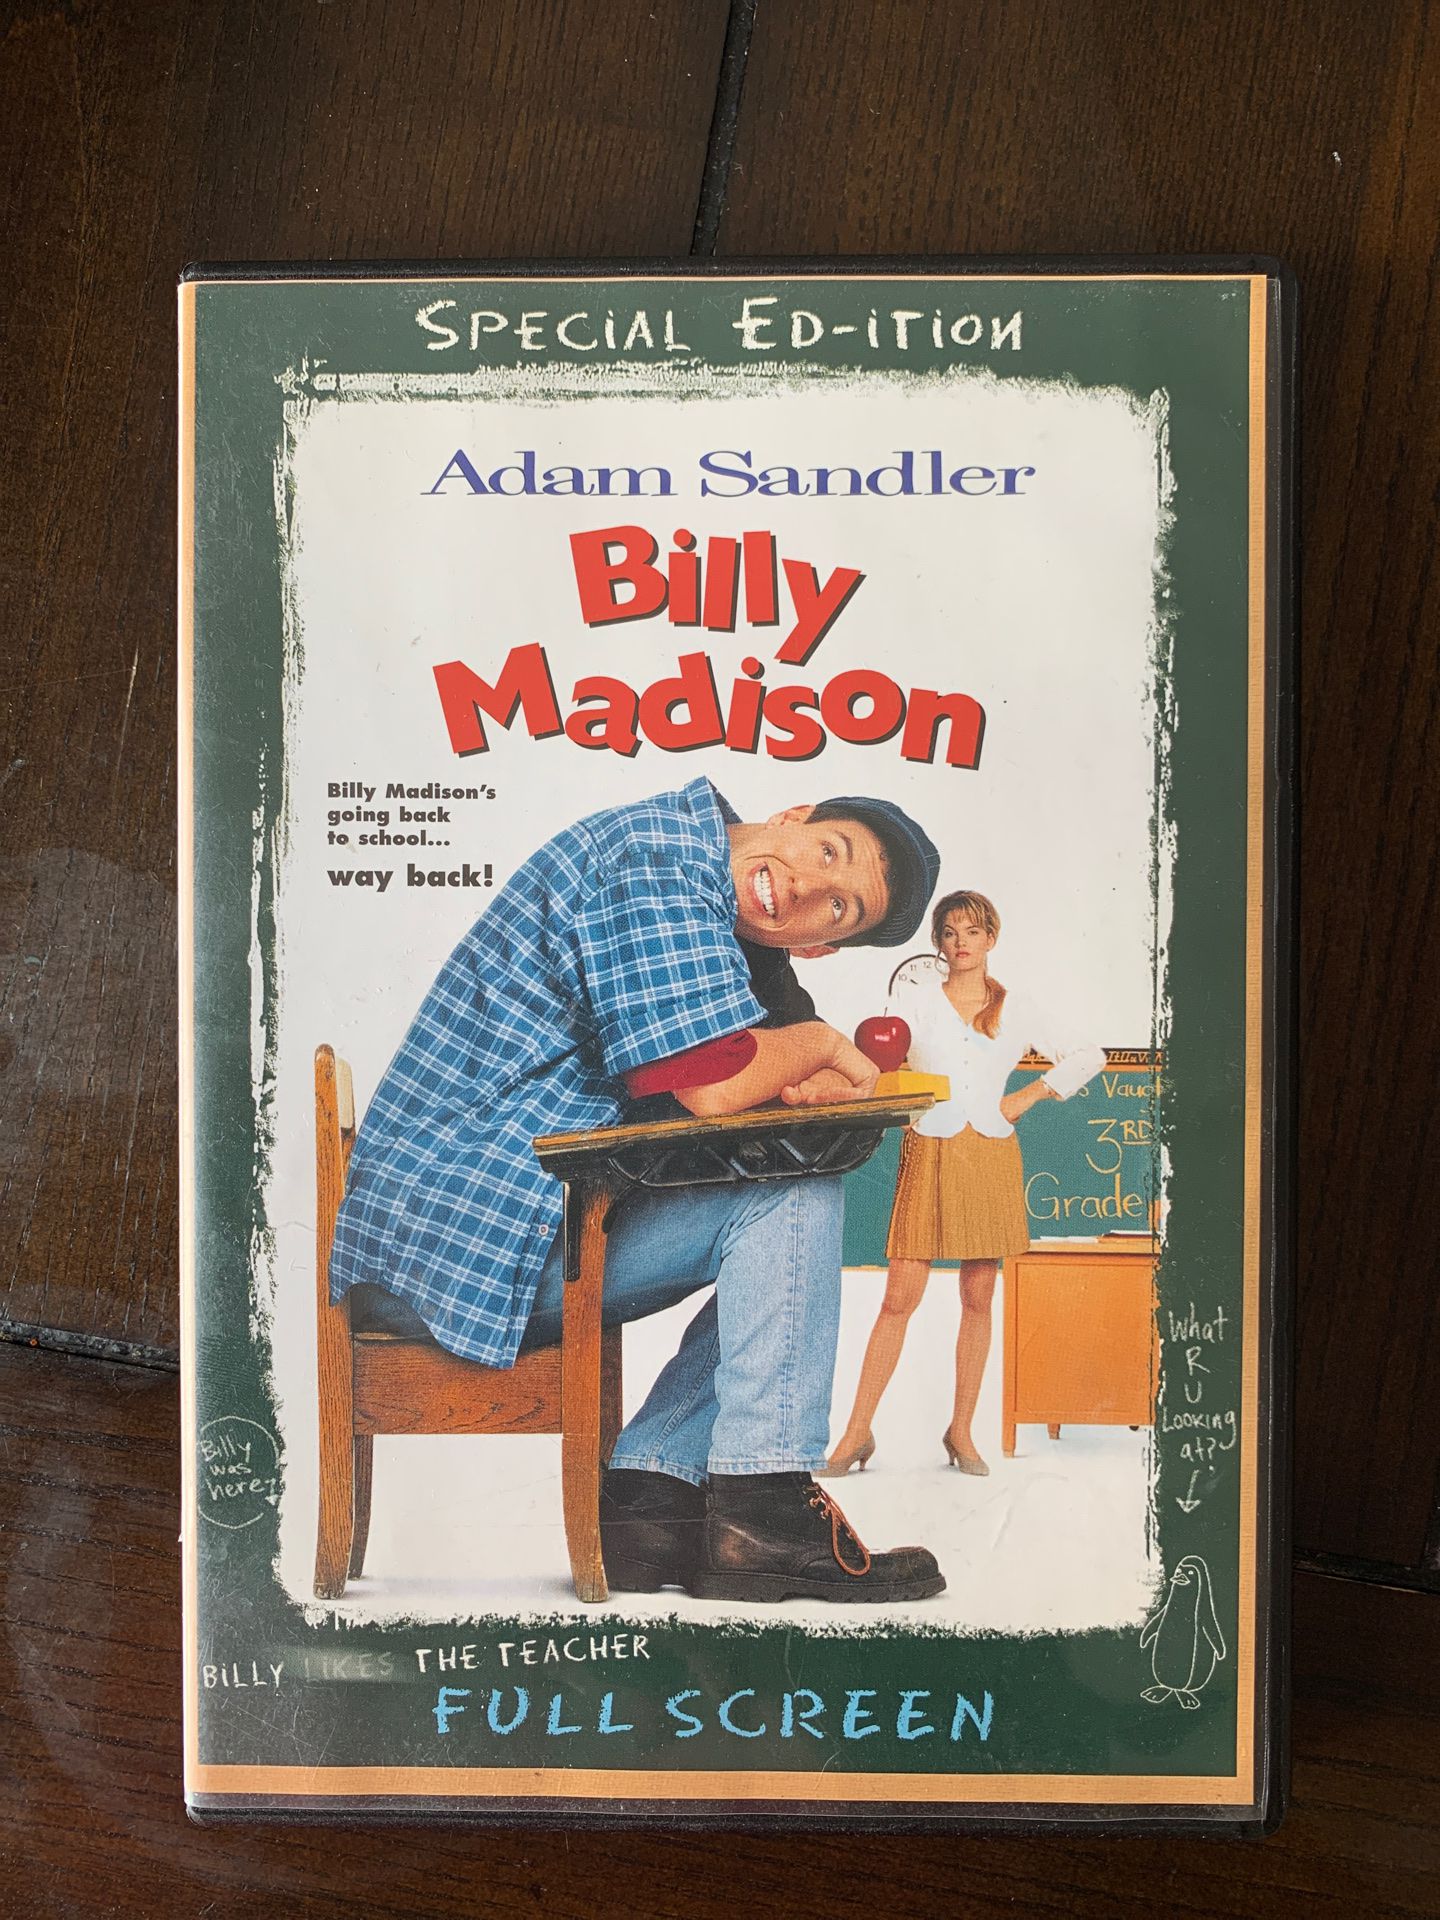 Billy Madison DVD (special edition)